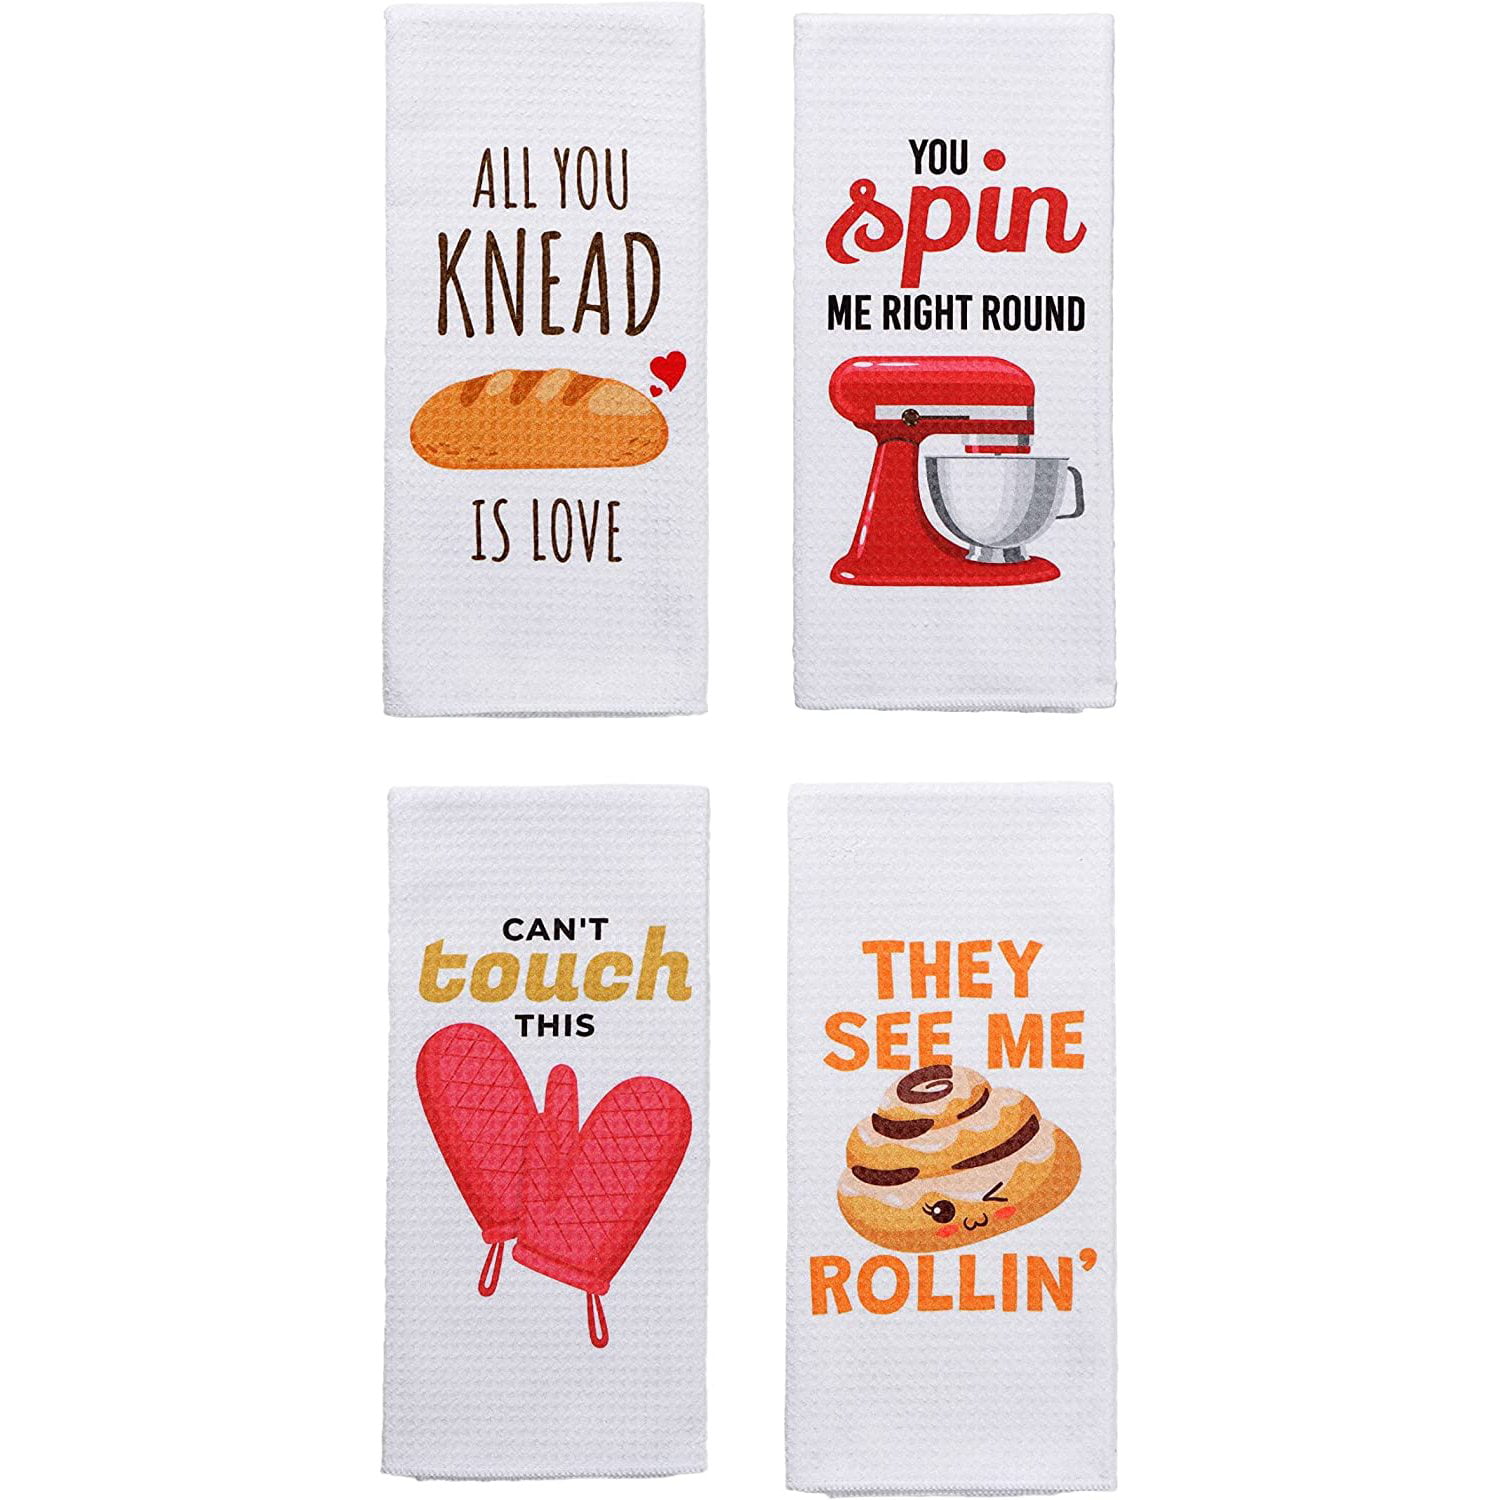 Does This Towel Smell Like Chloroform To You - Kitchen Towels Decorative Dish  Towels with Sayings, Funny Housewarming Kitchen Gifts - Multi-Use Cute  Kitchen Towels - Funny Gifts for Women - Yahoo Shopping